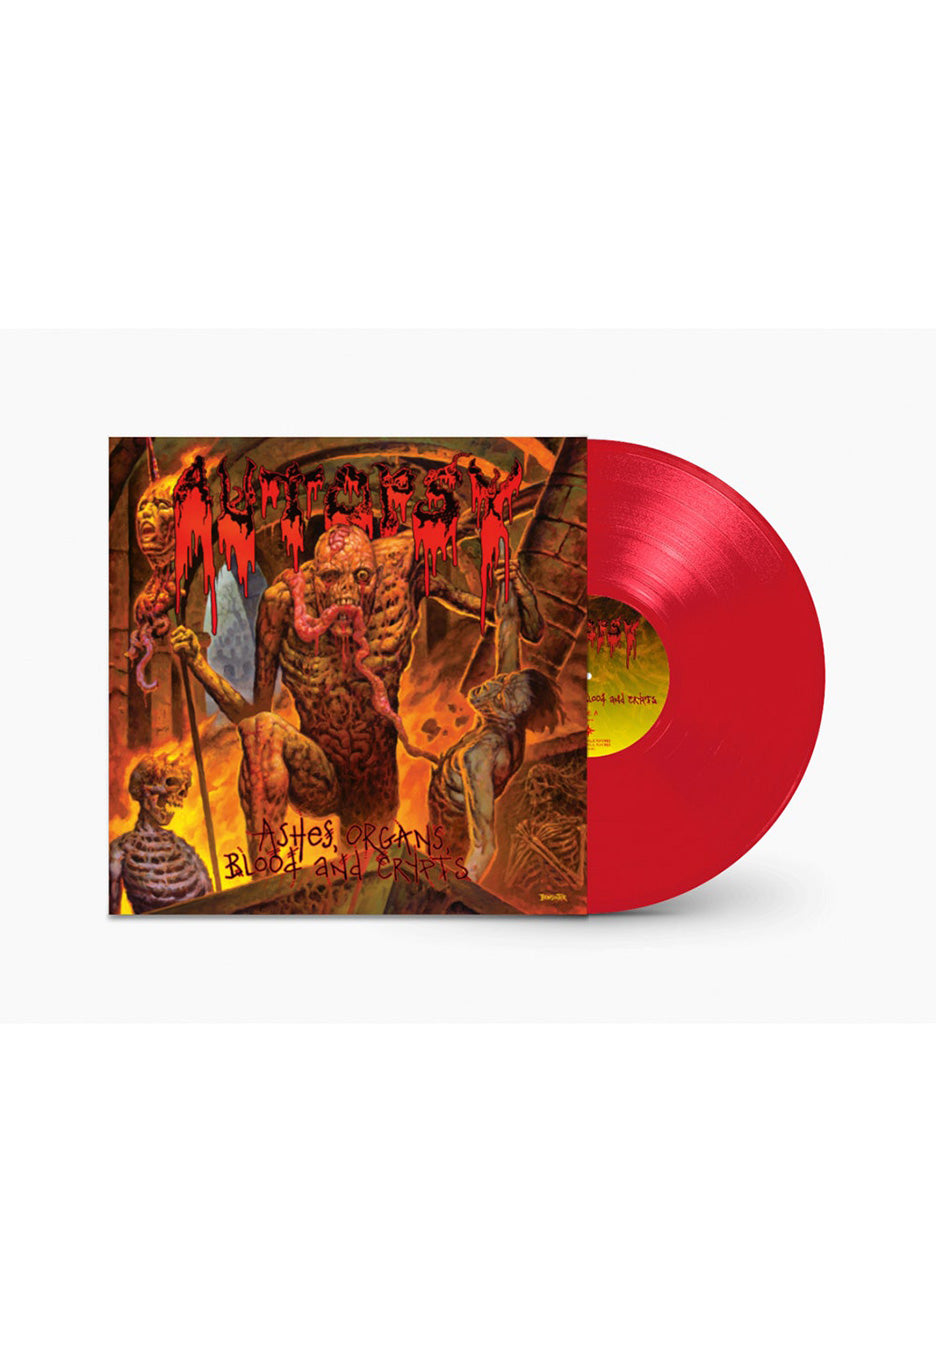 Autopsy - Ashes  Organs  Blood And Crypts Red - Colored Vinyl